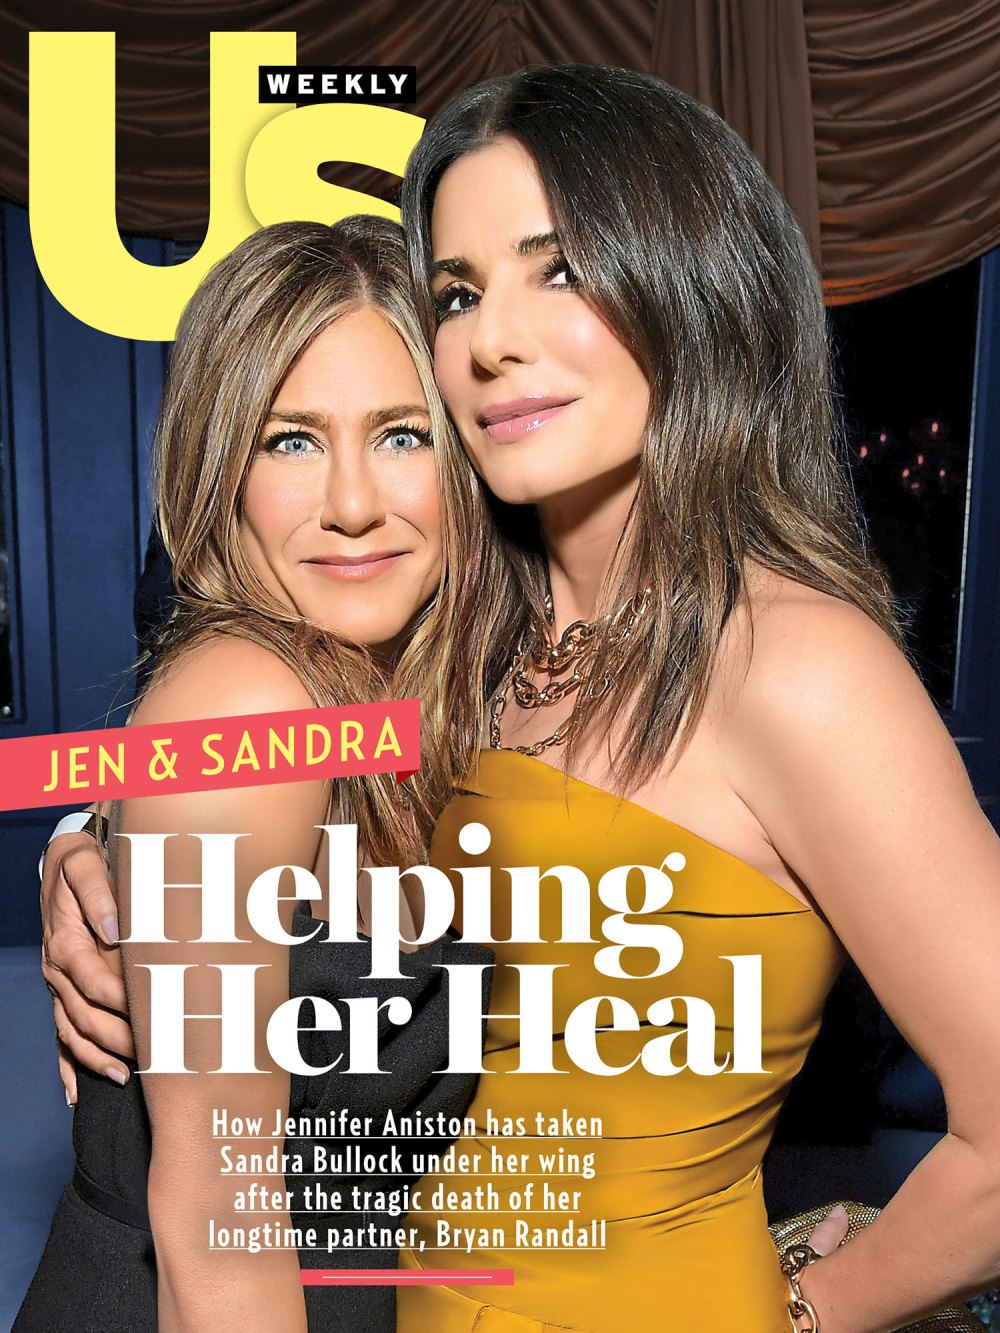 Jennifer Aniston and Sandra Bullock Us Weekly 2417 Cover No Chips